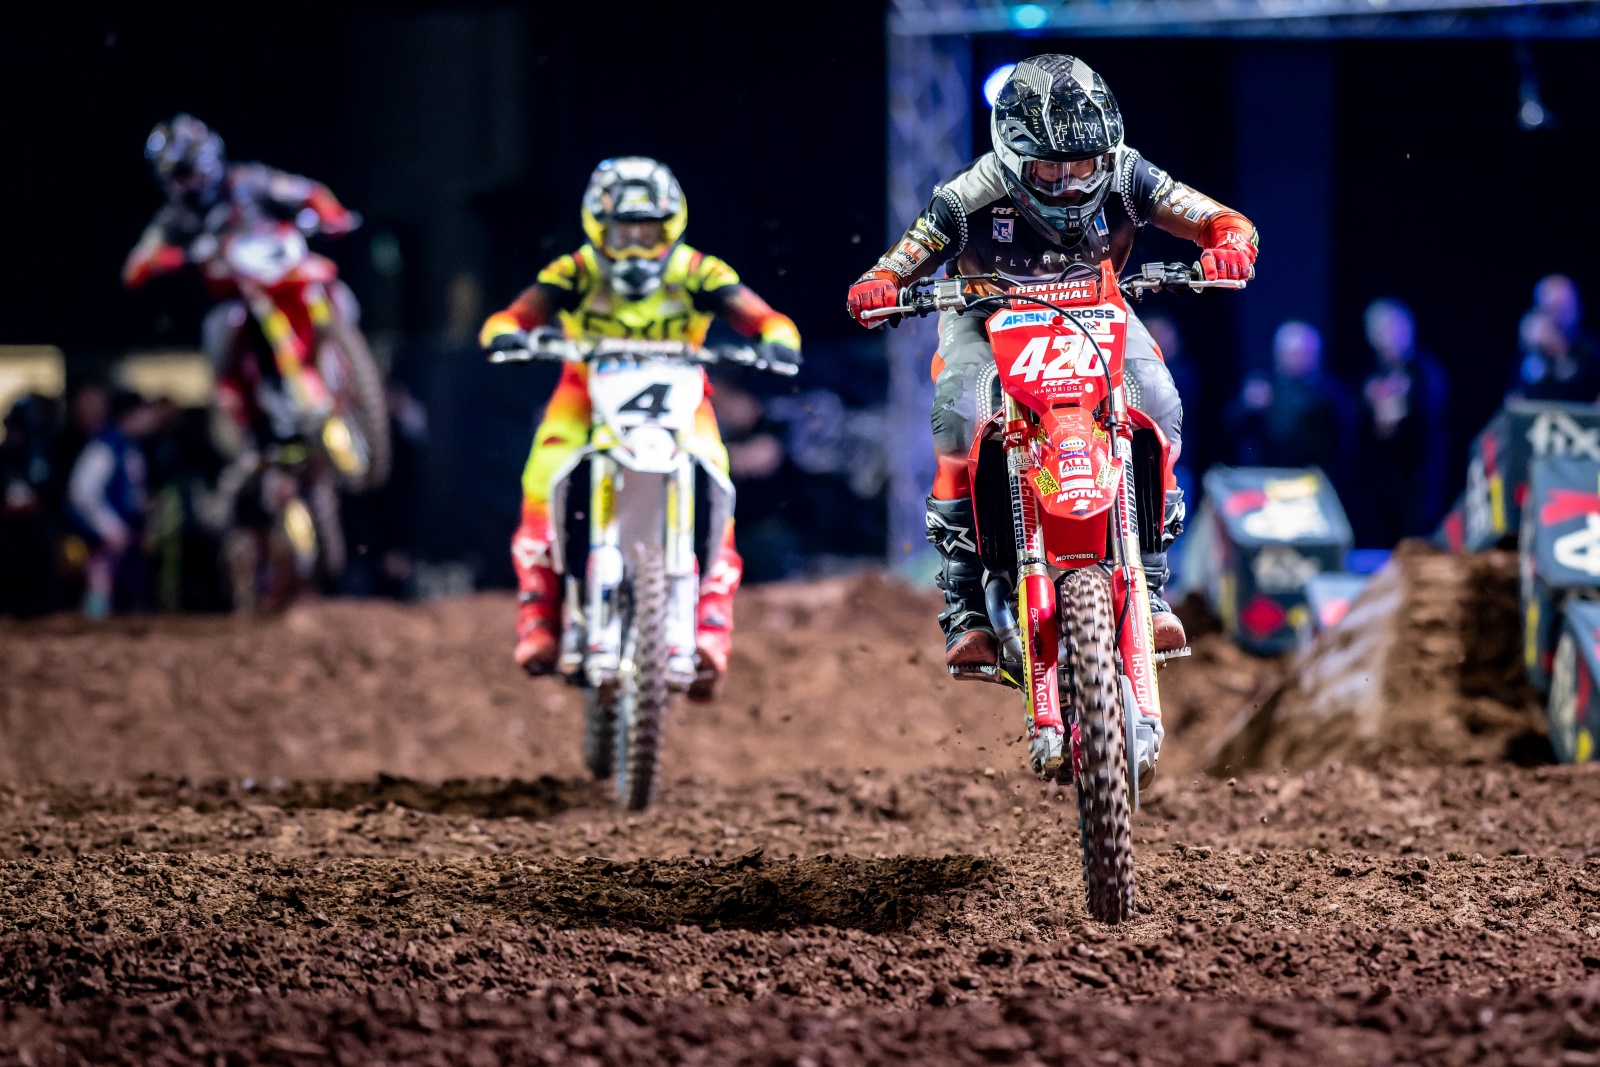 Arenacross returns to Resorts World Arena with free live streaming